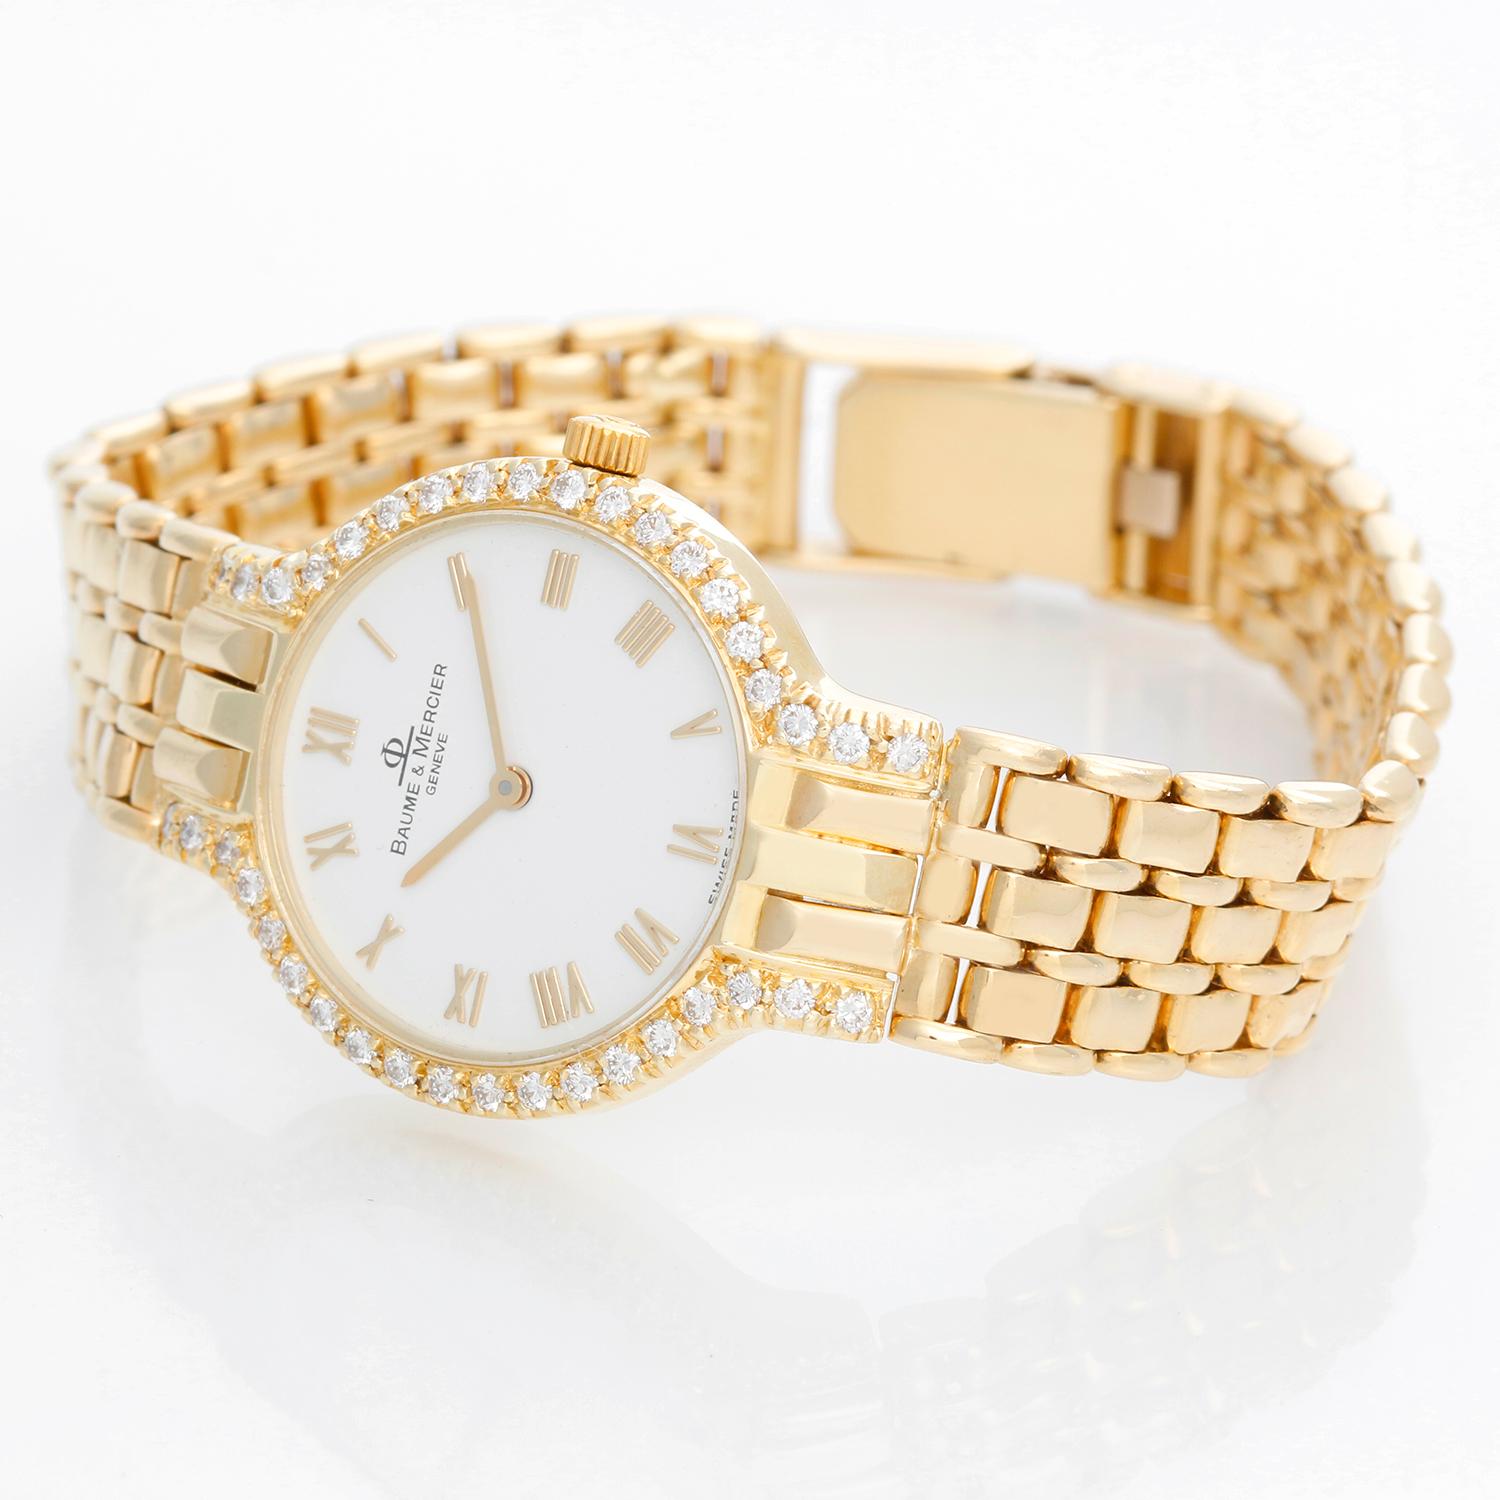 Baume & Mercier 18K Yellow Gold Diamond Watch - Quartz . 18K Yellow gold with diamonds on bezel and lugs ( 24 mm ) . White dial with raised gold Roman numerals . 18K Yellow gold link bracelet . Pre-owned with custom box .